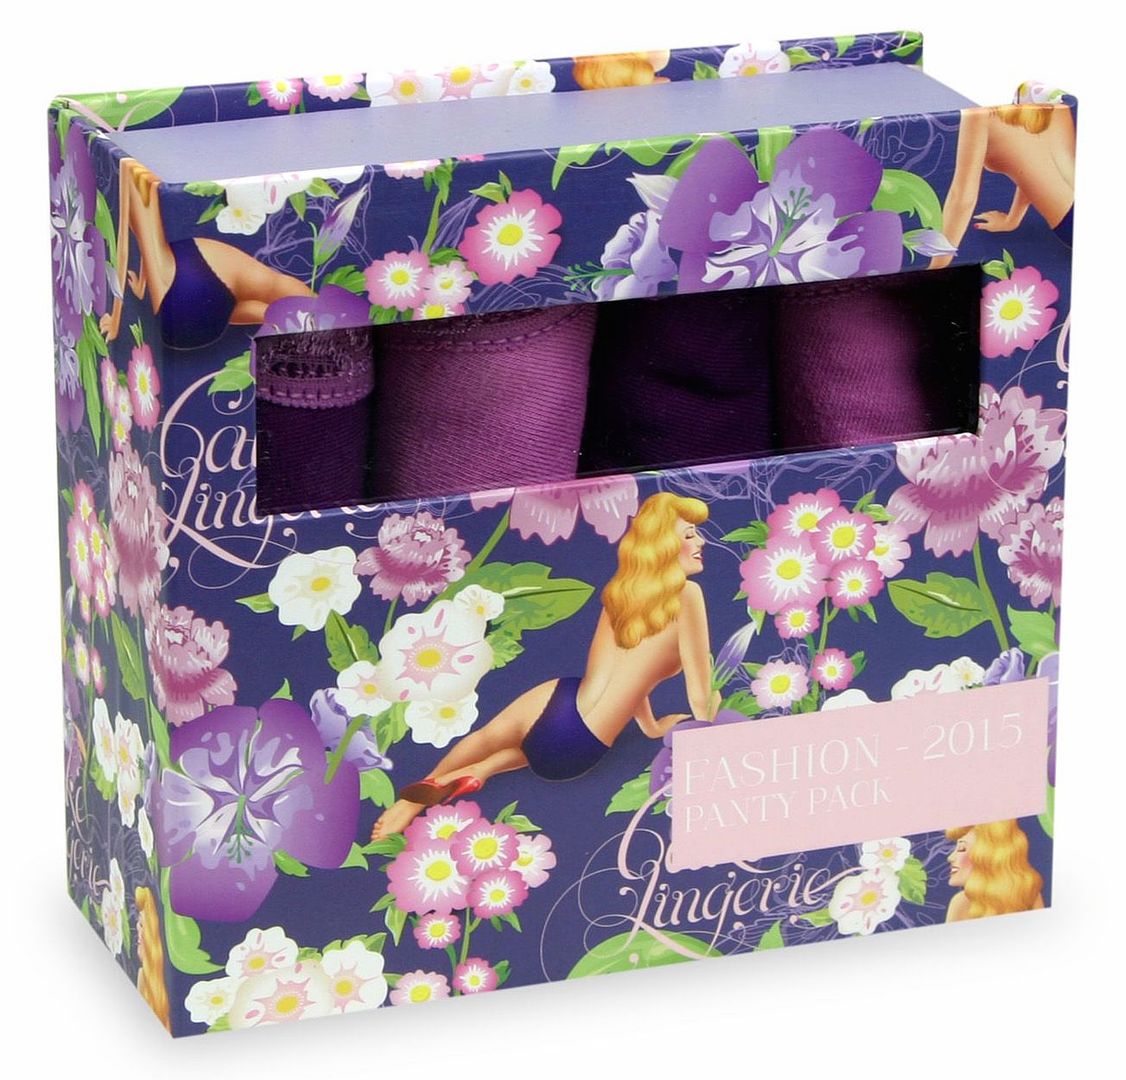 Cake Maternity Lingerie's Fashion Knickers Pack in a pretty box for gifting